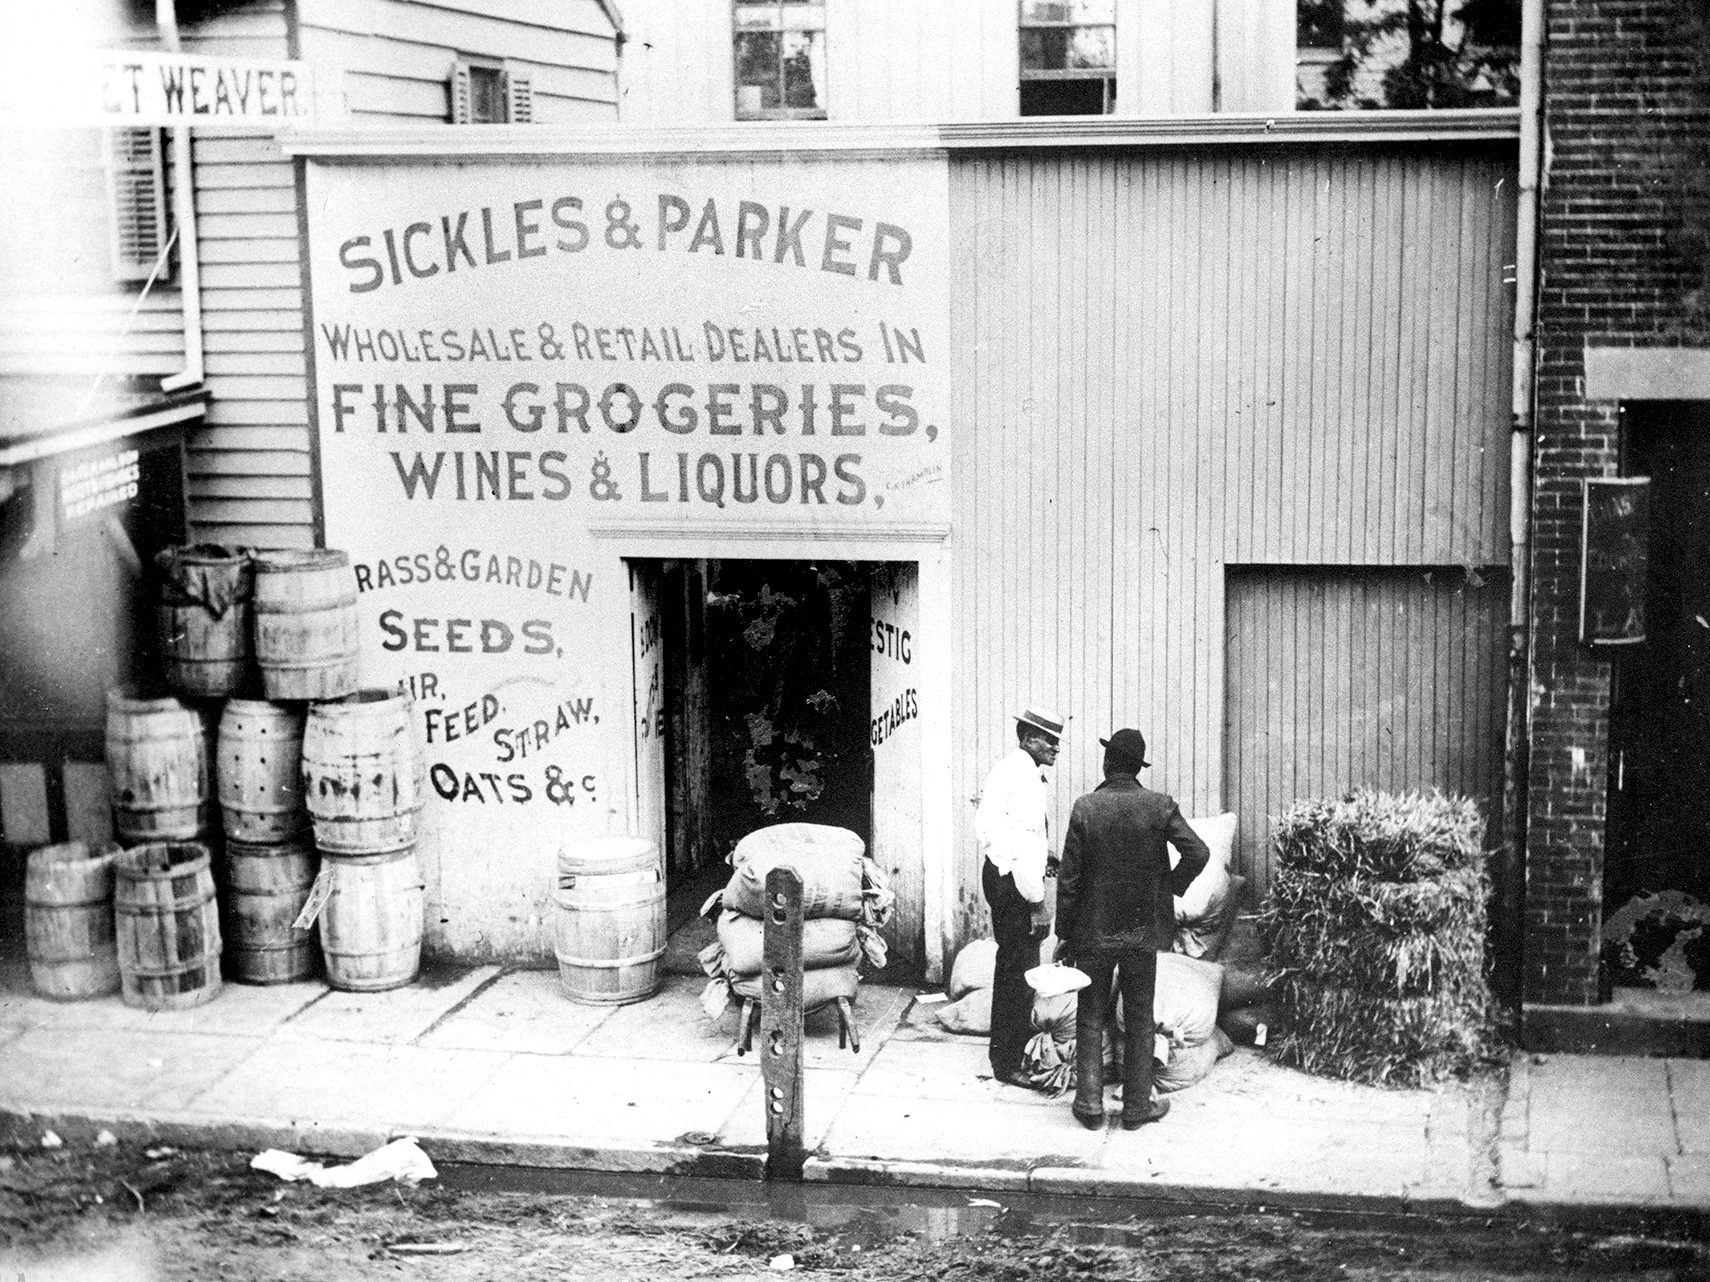 Sickles Market began in 1908 as a farm which sold produce to local stores. The business grew to include a seasonal farm stand, and in 1999 current owner Bob Sickles Jr. transformed the business into a year-round retail store. As of this week, the business is closed. Courtesy Sickles Market 